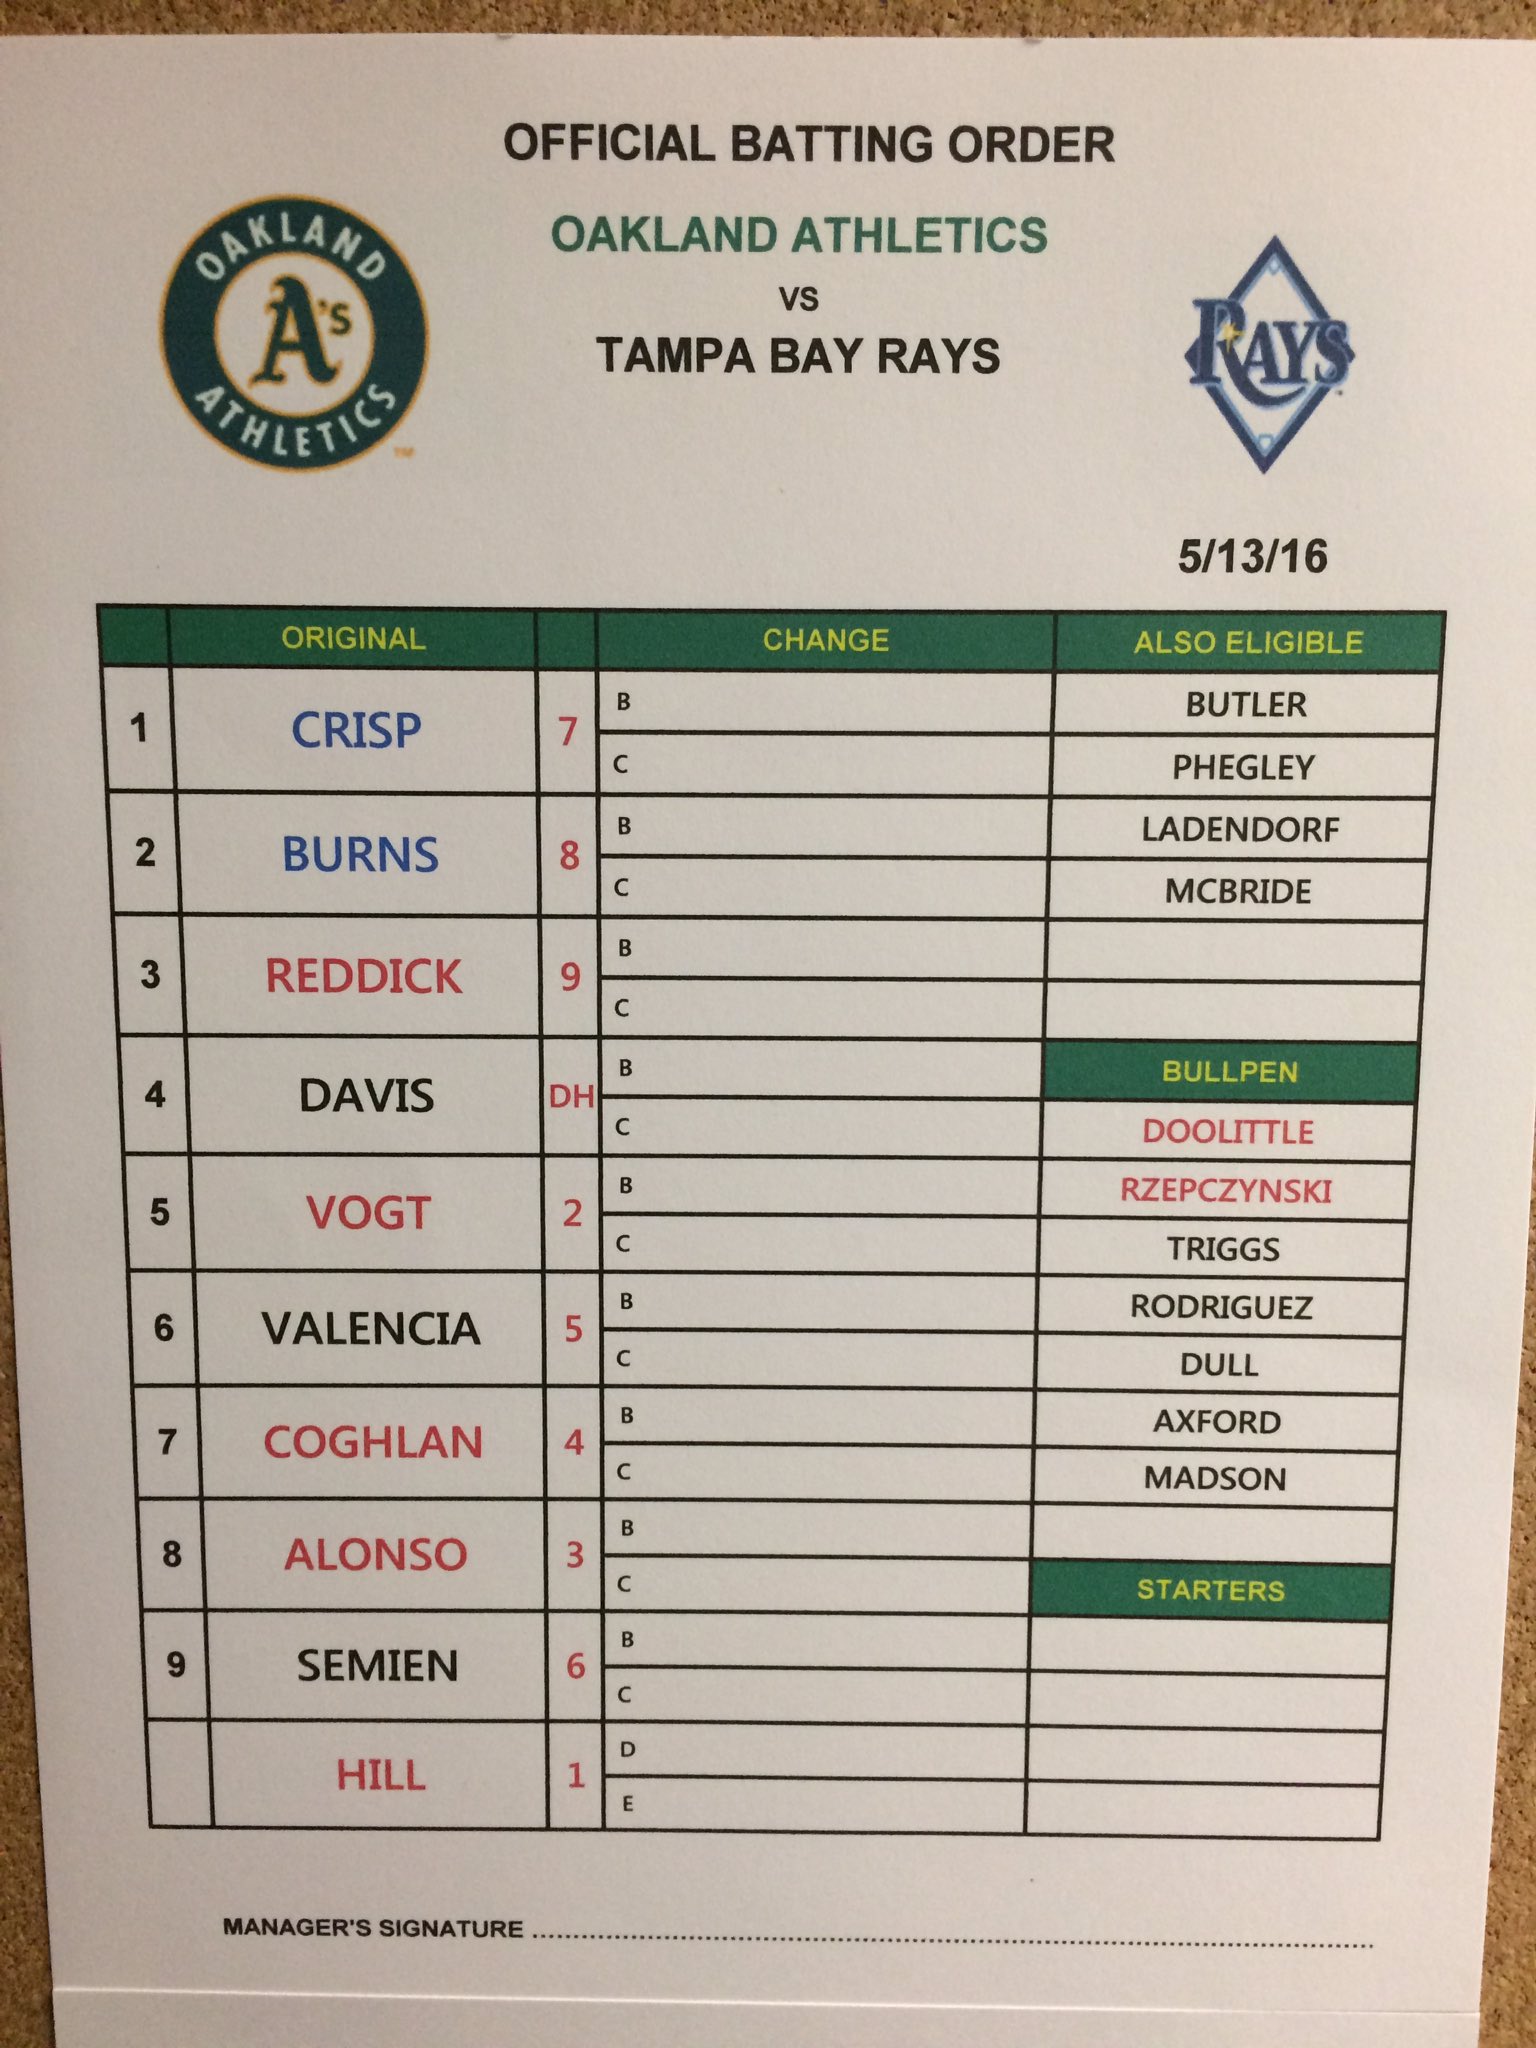 Oakland Athletics 🌳🐘⚾️ on Twitter "We're in Florida! And with that